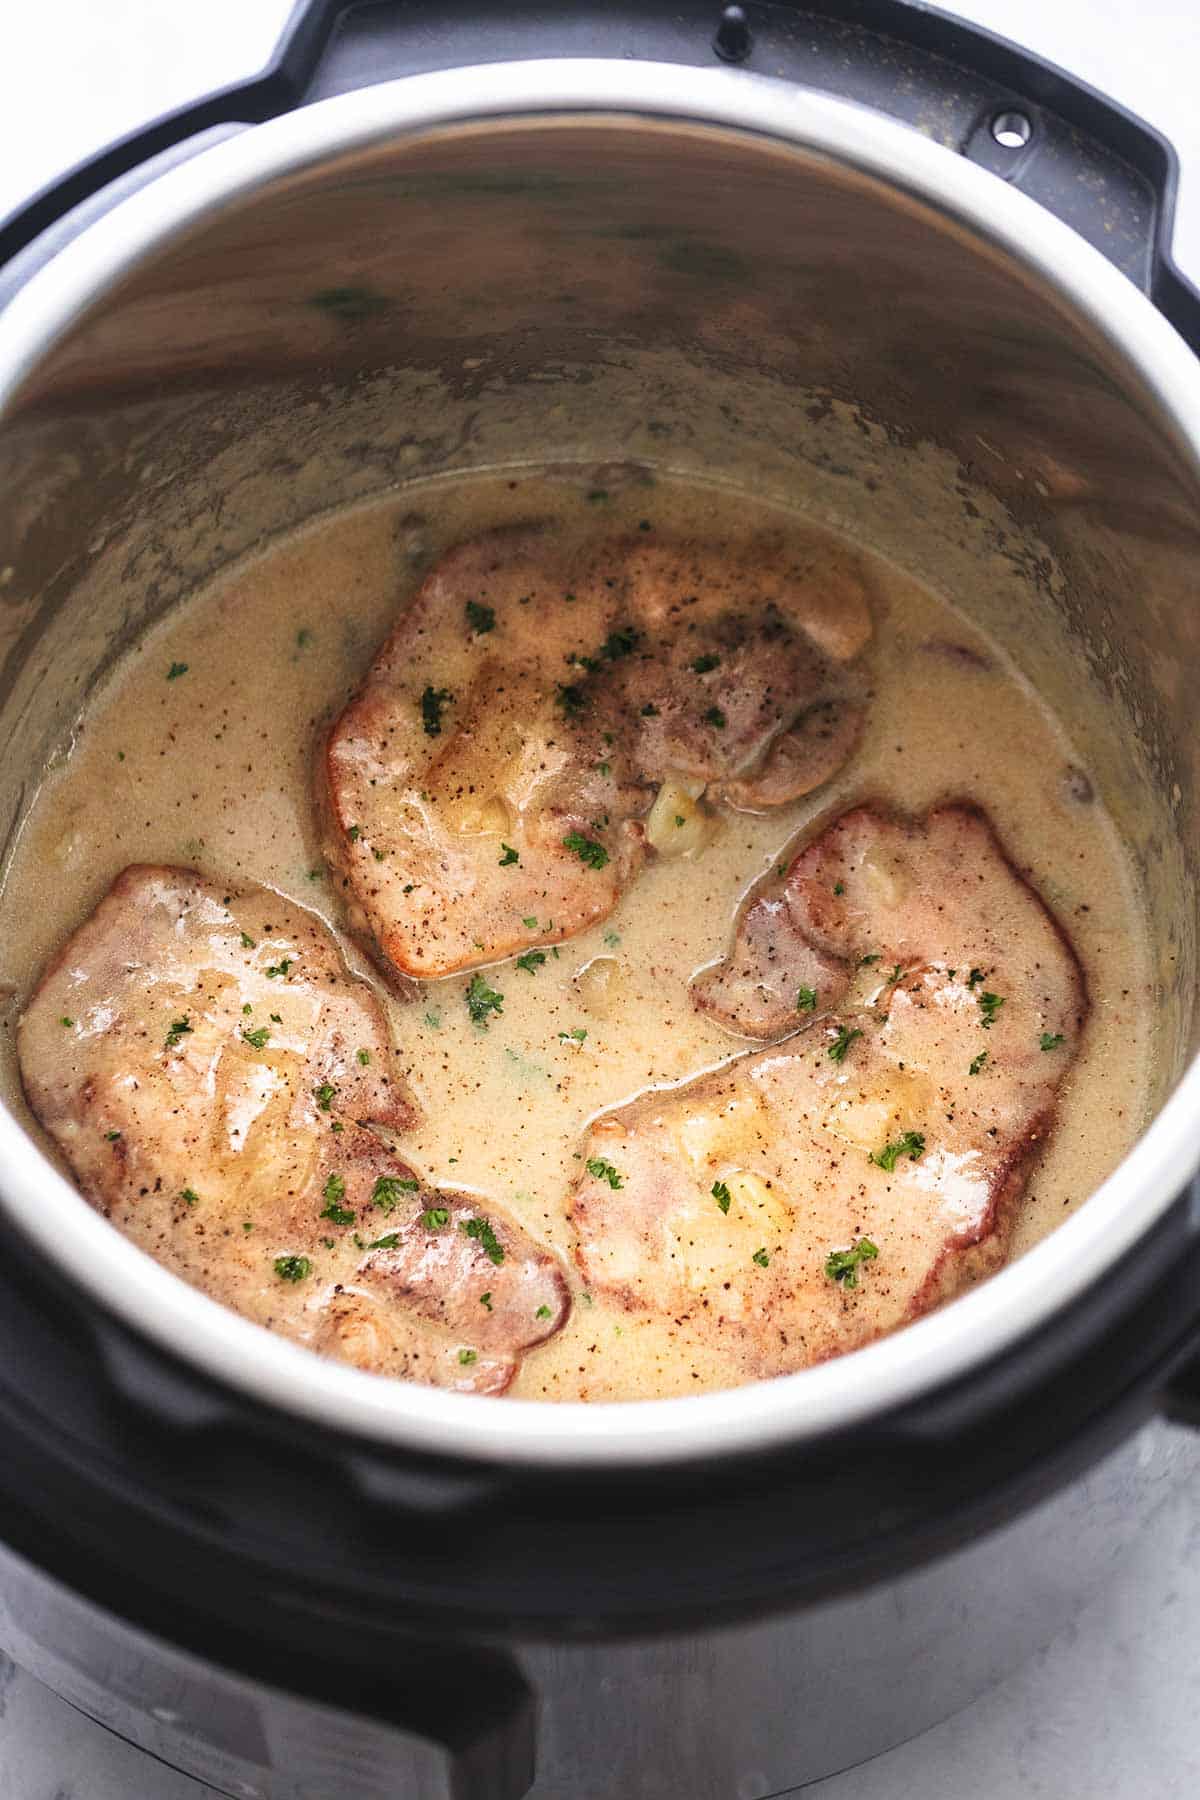 pork chops and gravy in pressure cooker